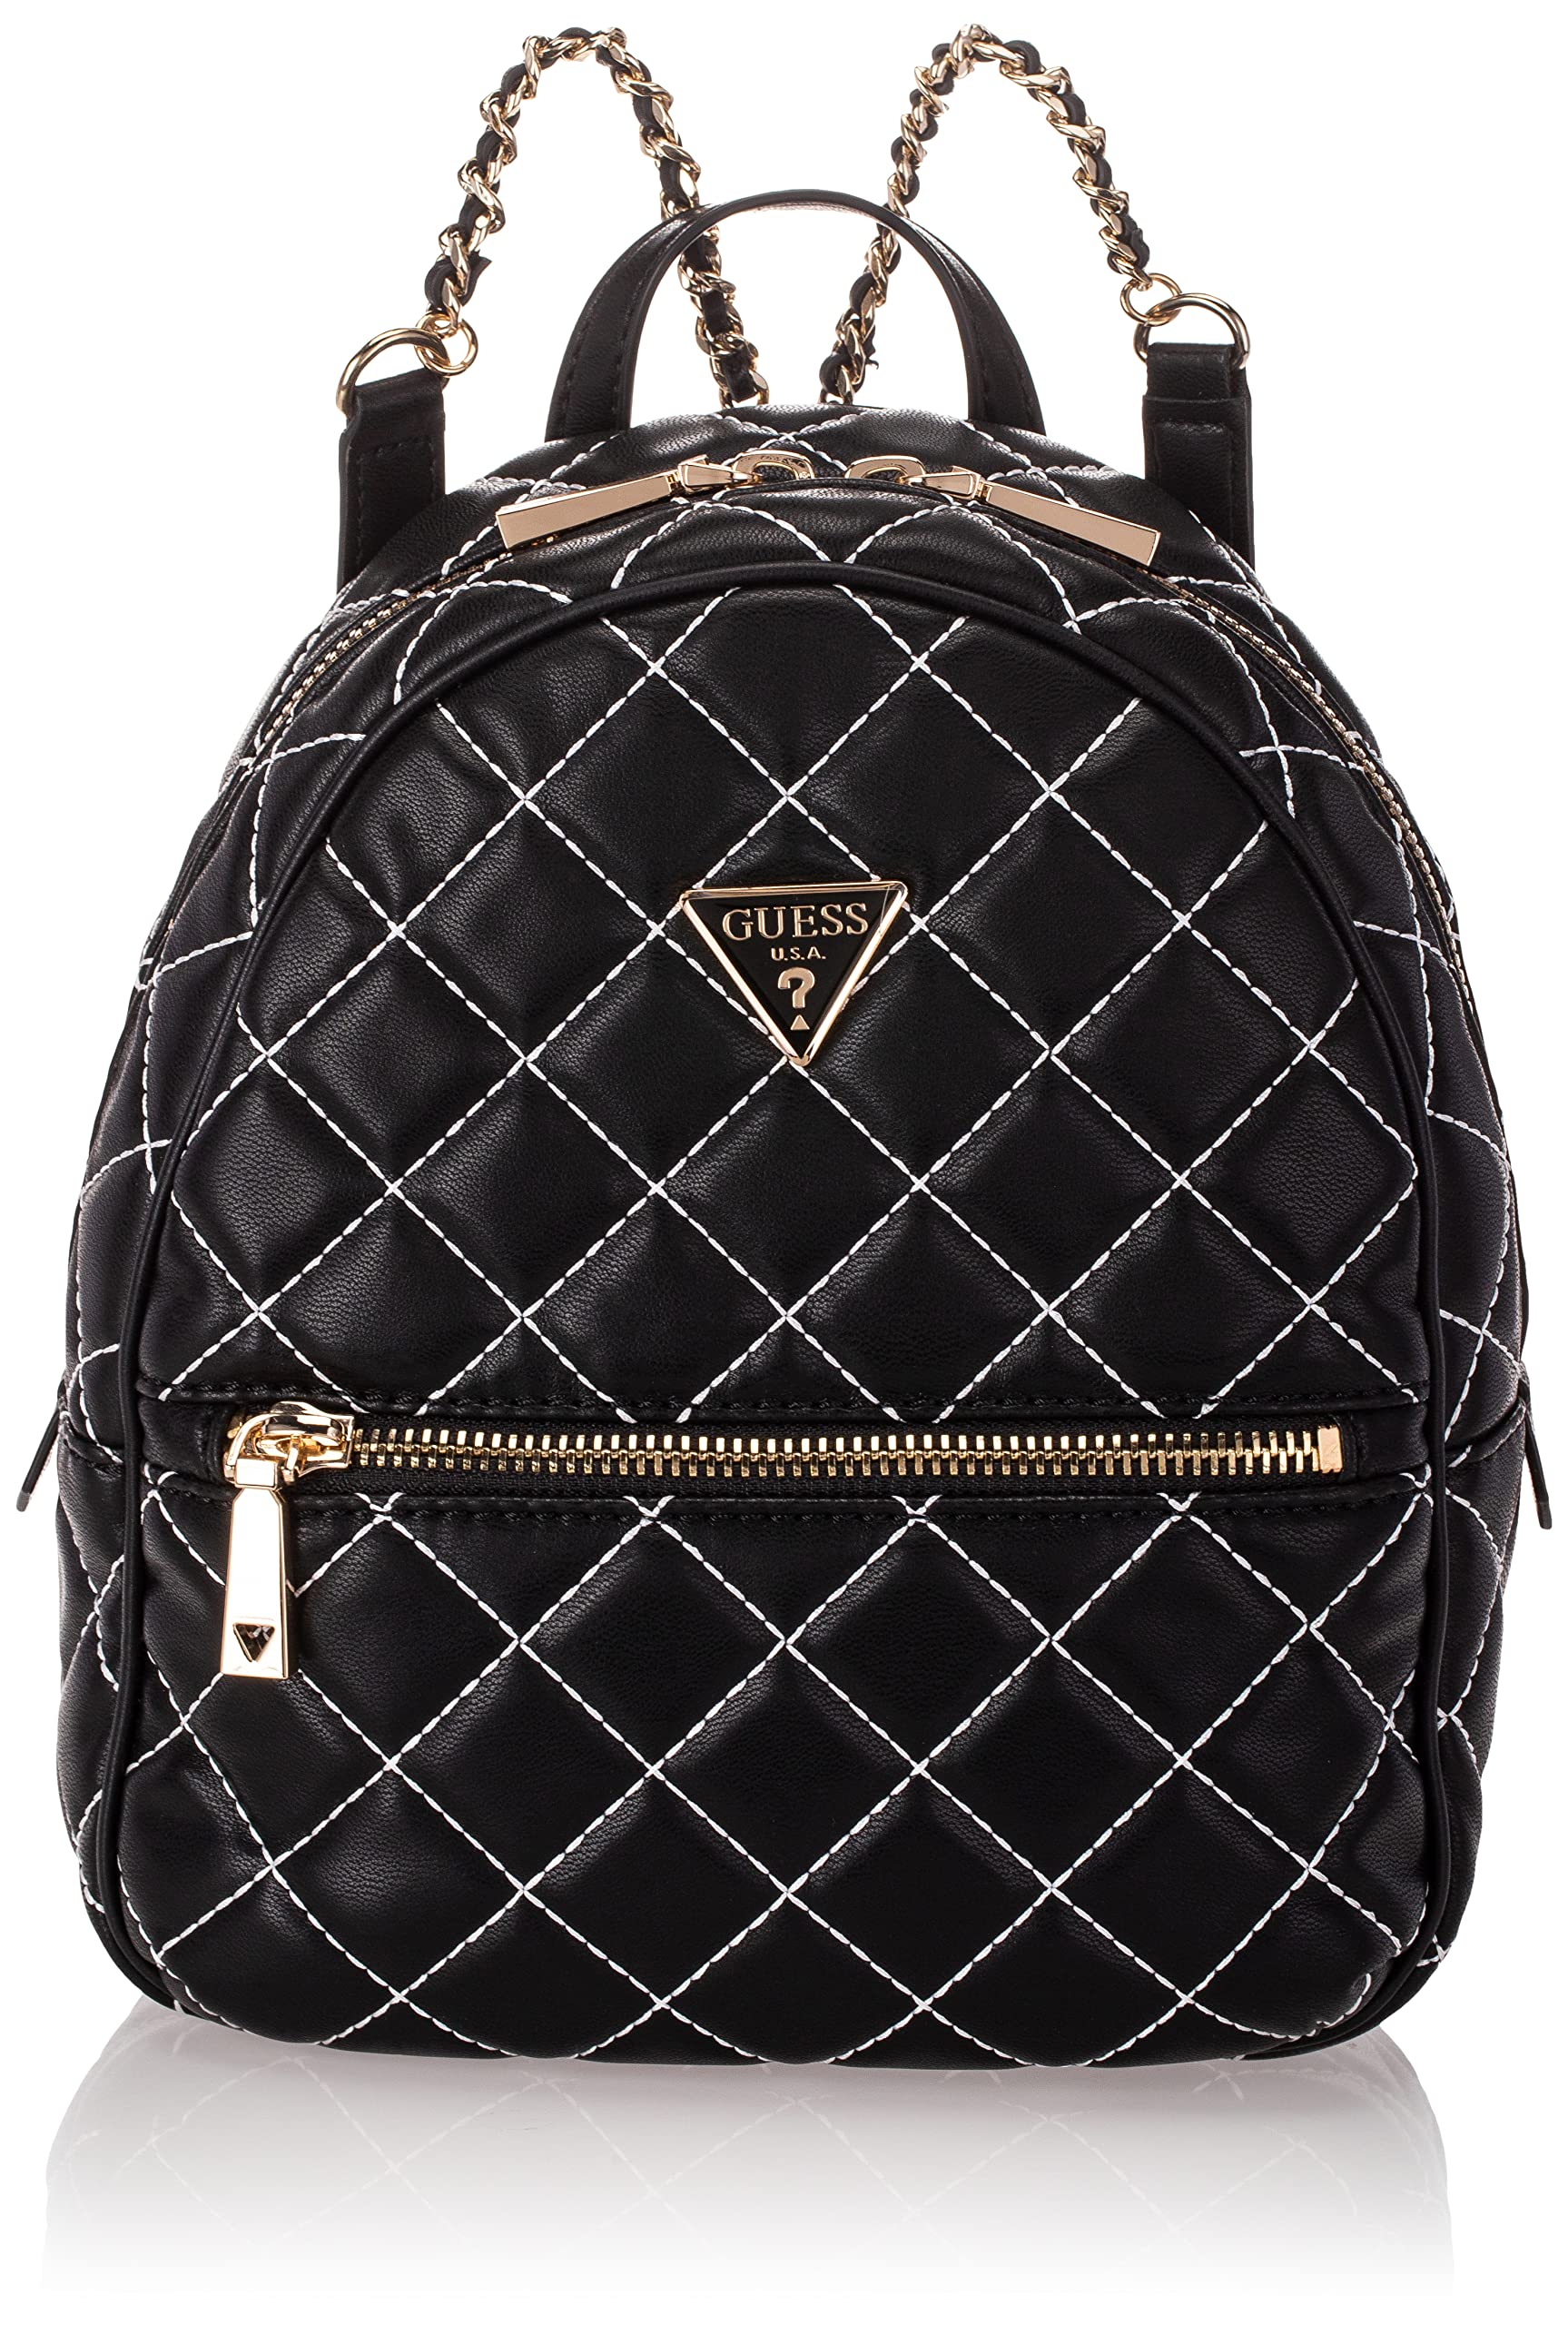 GUESS womens Cessily Backpack, Black Multi, one size US